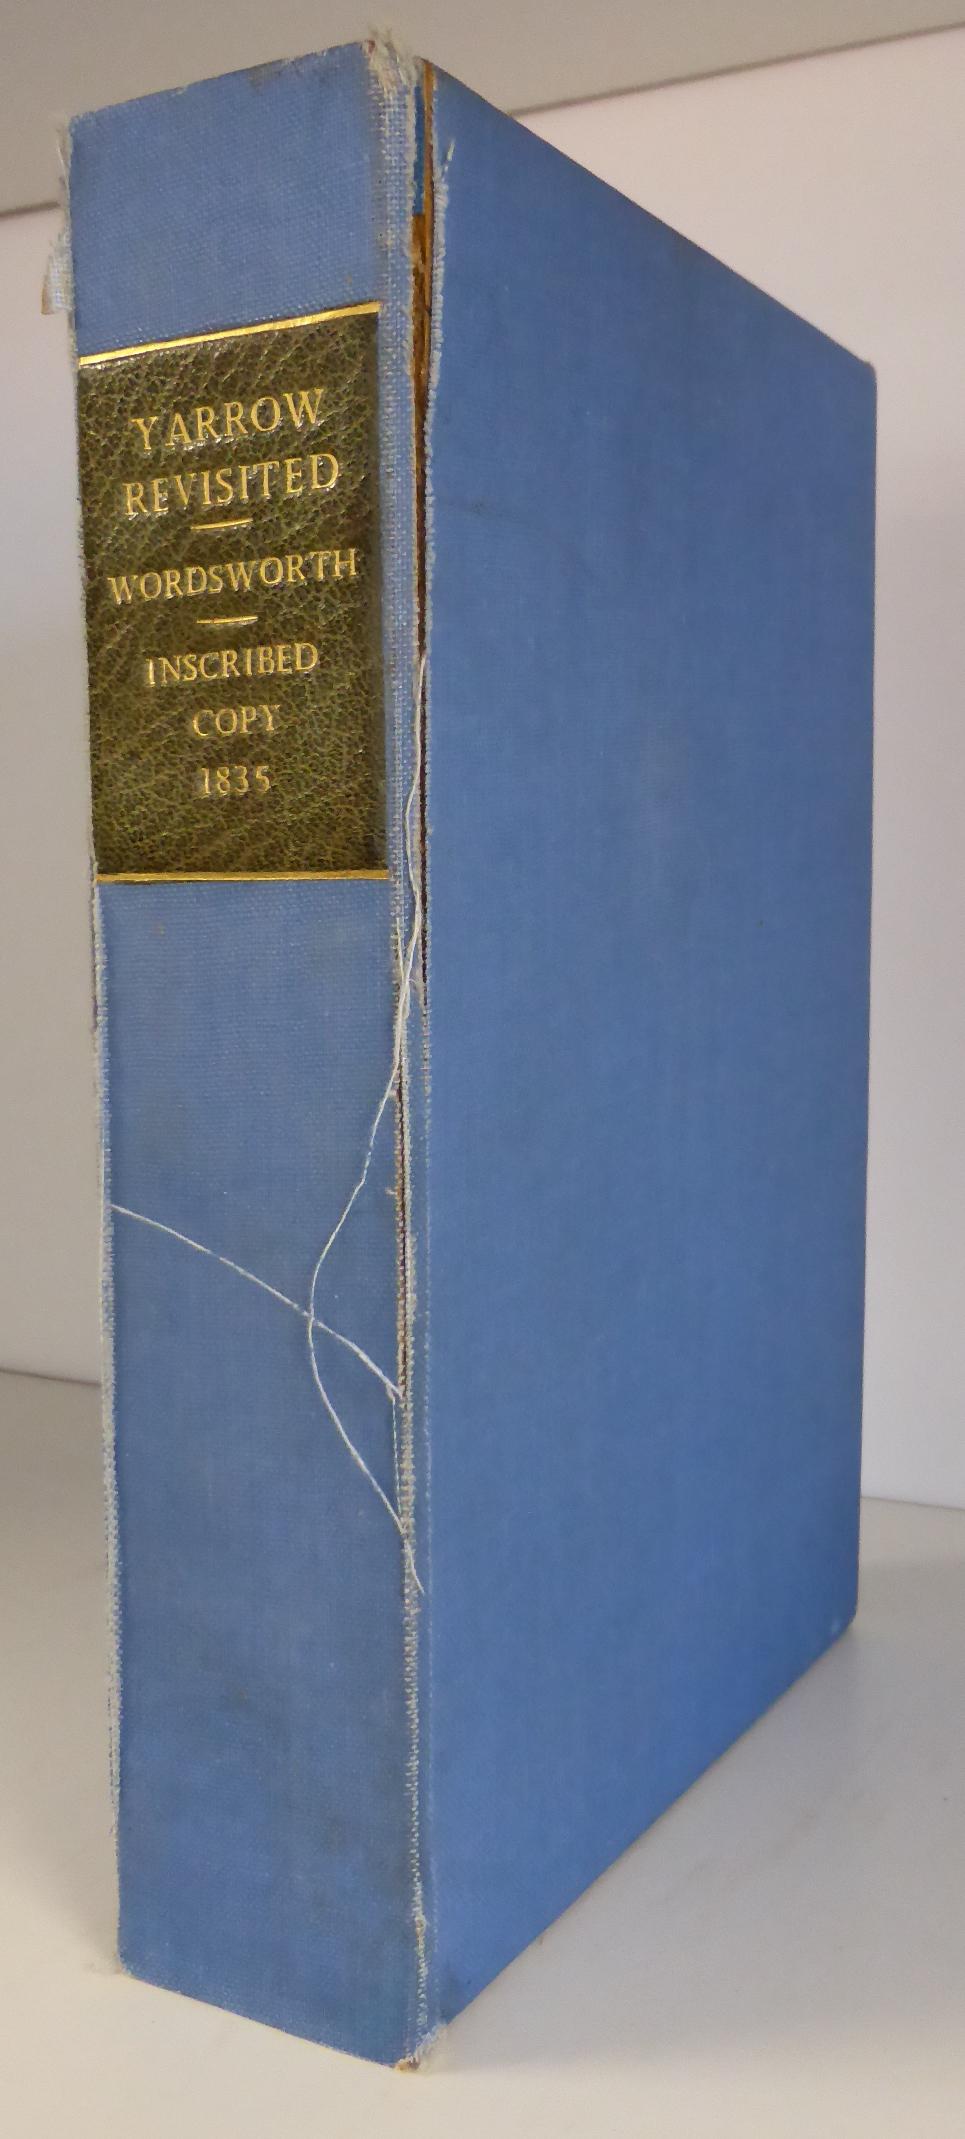 Wordsworth (William) Yarrow Revisited and Other Poems, 1835, Longman, Rees ..., first edition,